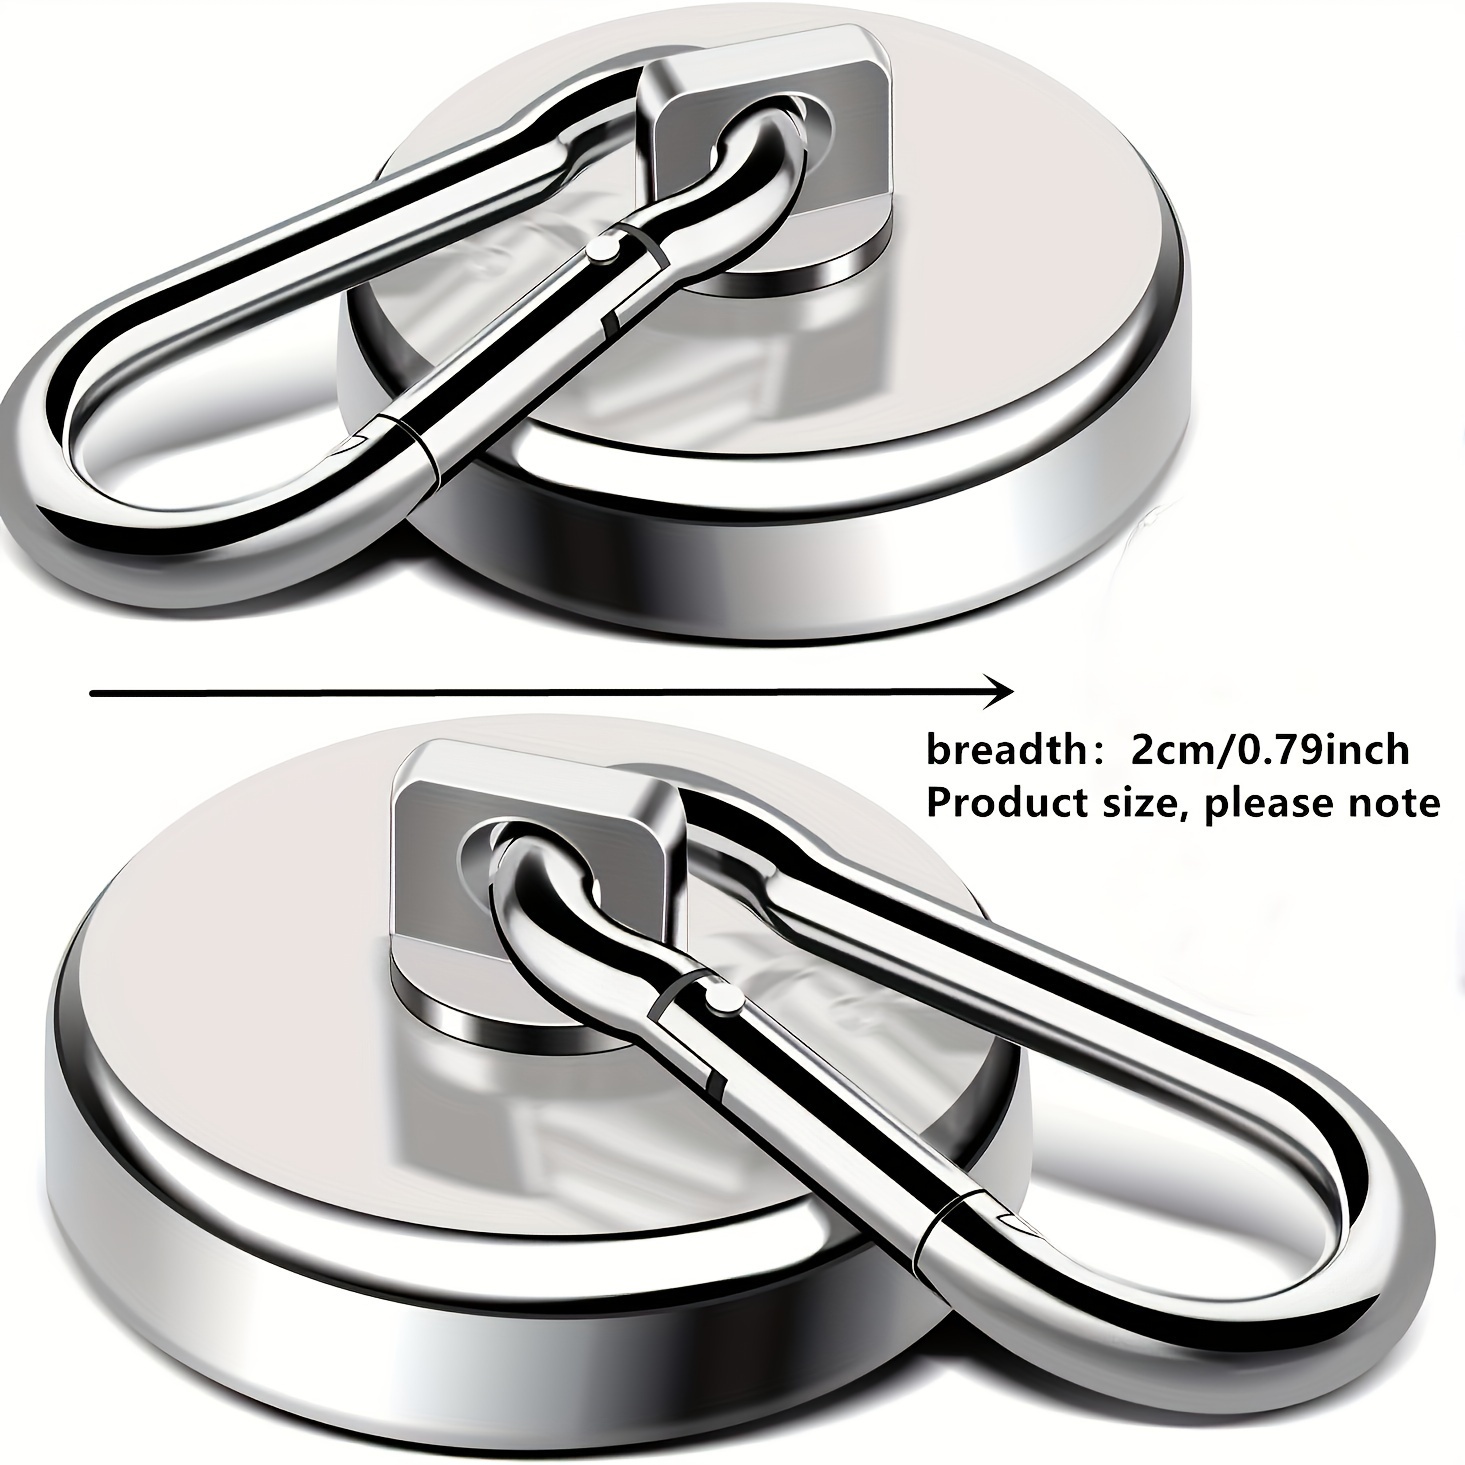 

2-pack Stainless Steel Magnetic Hooks With Carabiner - Polished Finish, Rust Resistant, Wall Mount Heavy Duty Neodymium Magnets For Bbq, Kitchen, Garage, Cruise, Refrigerator - 100lbs Capacity